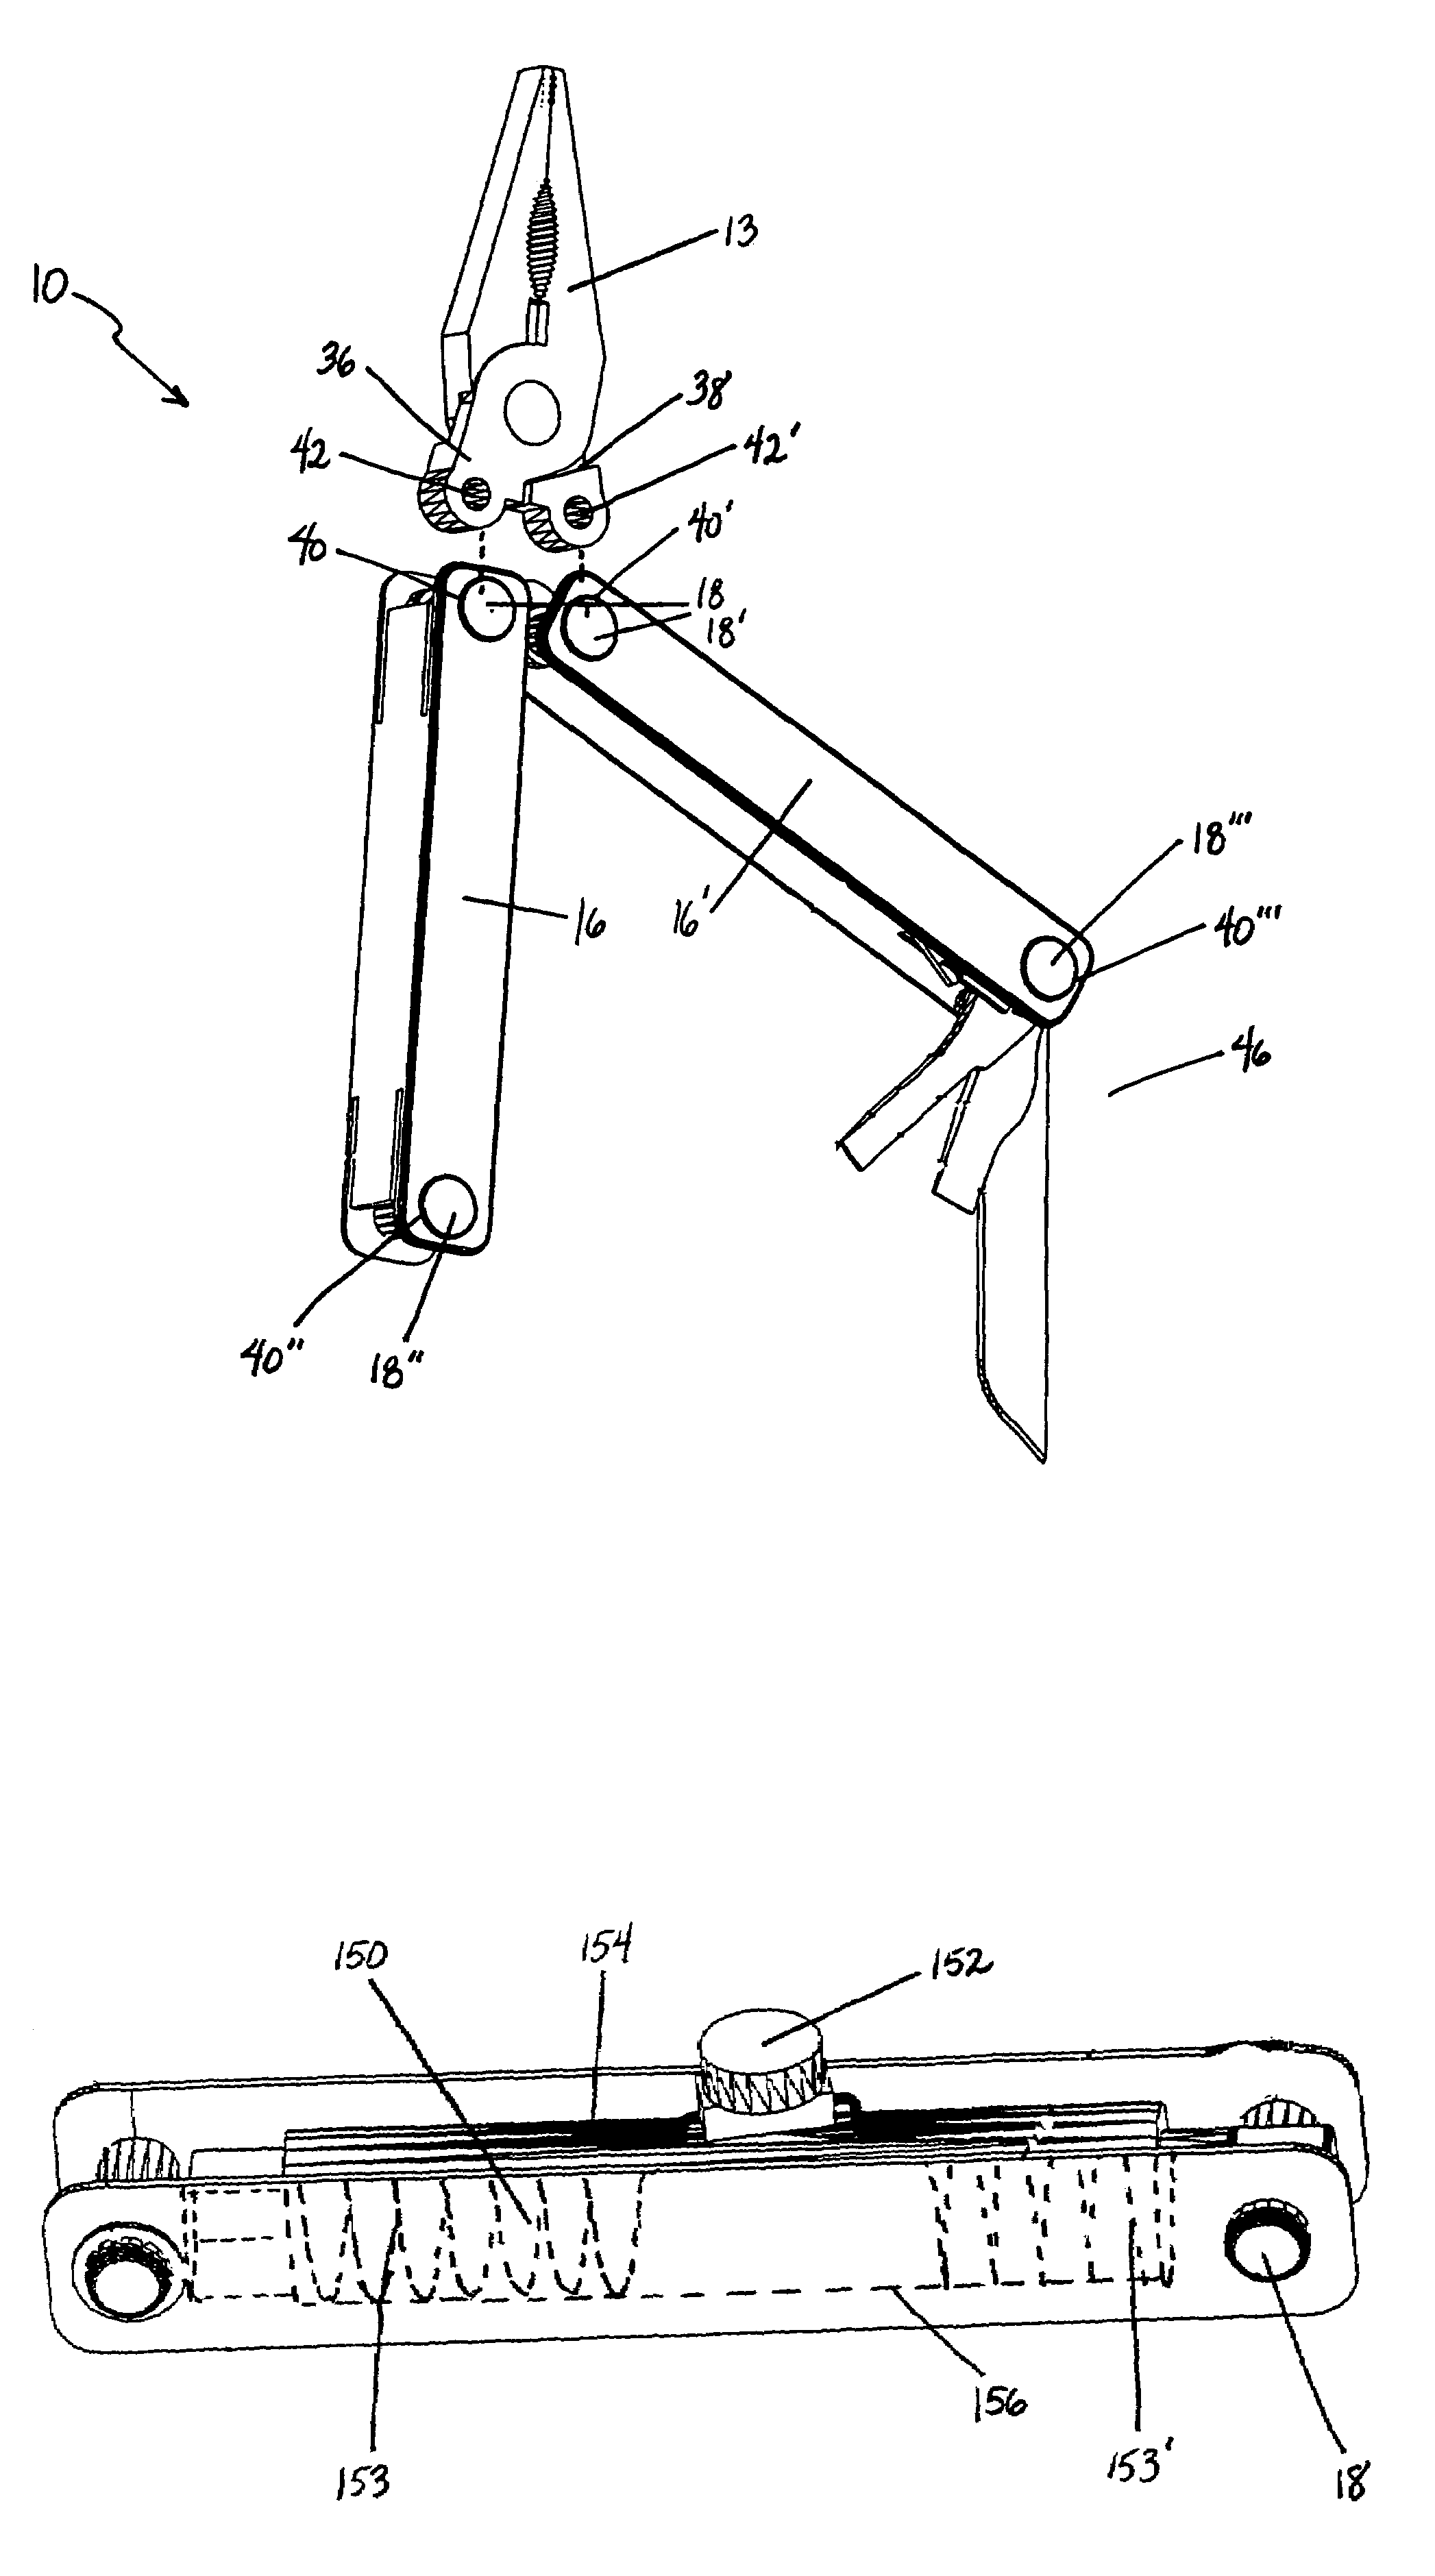 Universal, interchangeable tool attachment system